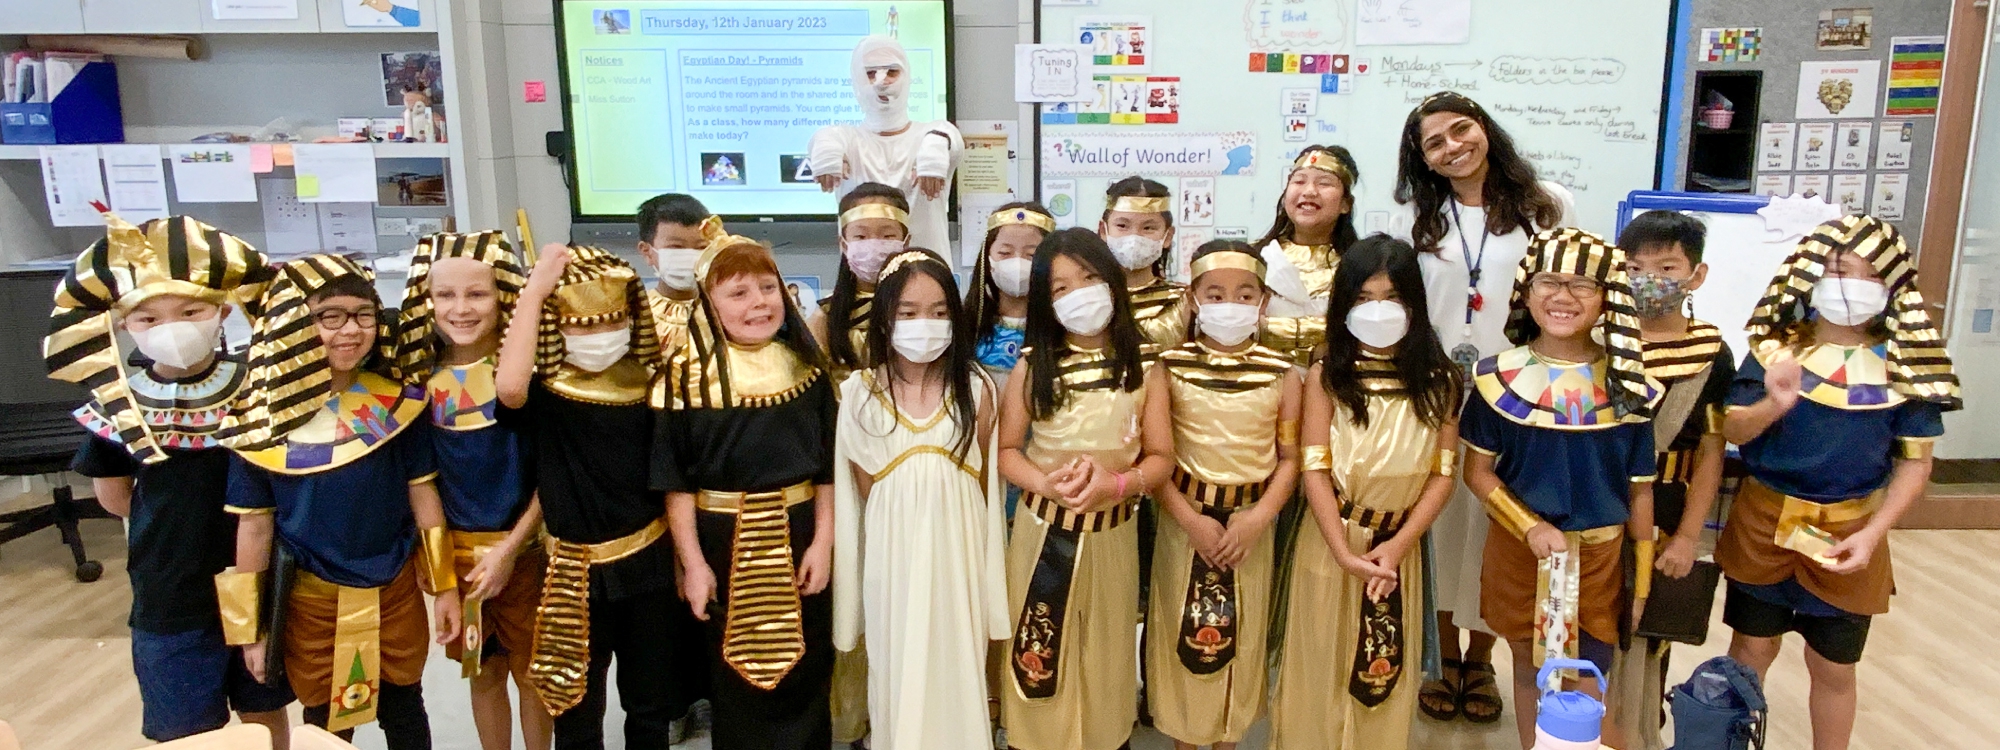 Sparking curiosity for Ancient Egypt in Year 3 students